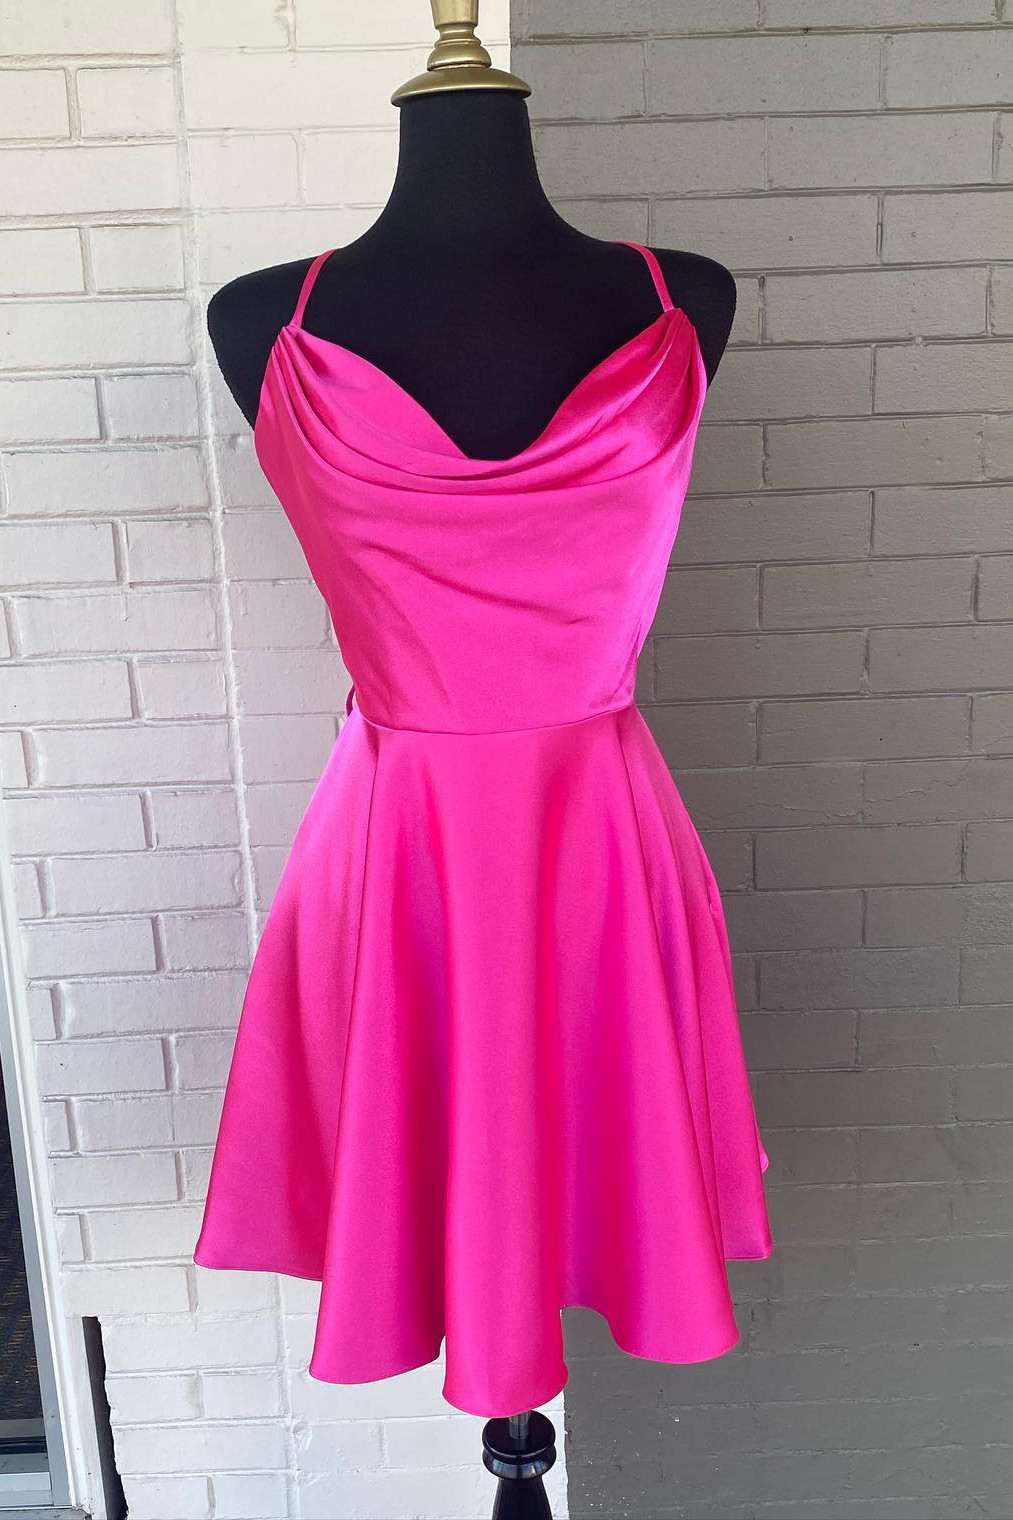 Cute Dress, Neon Pink Lace-Up A-Line Satin Homecoming Dress,Night Dress Party Short